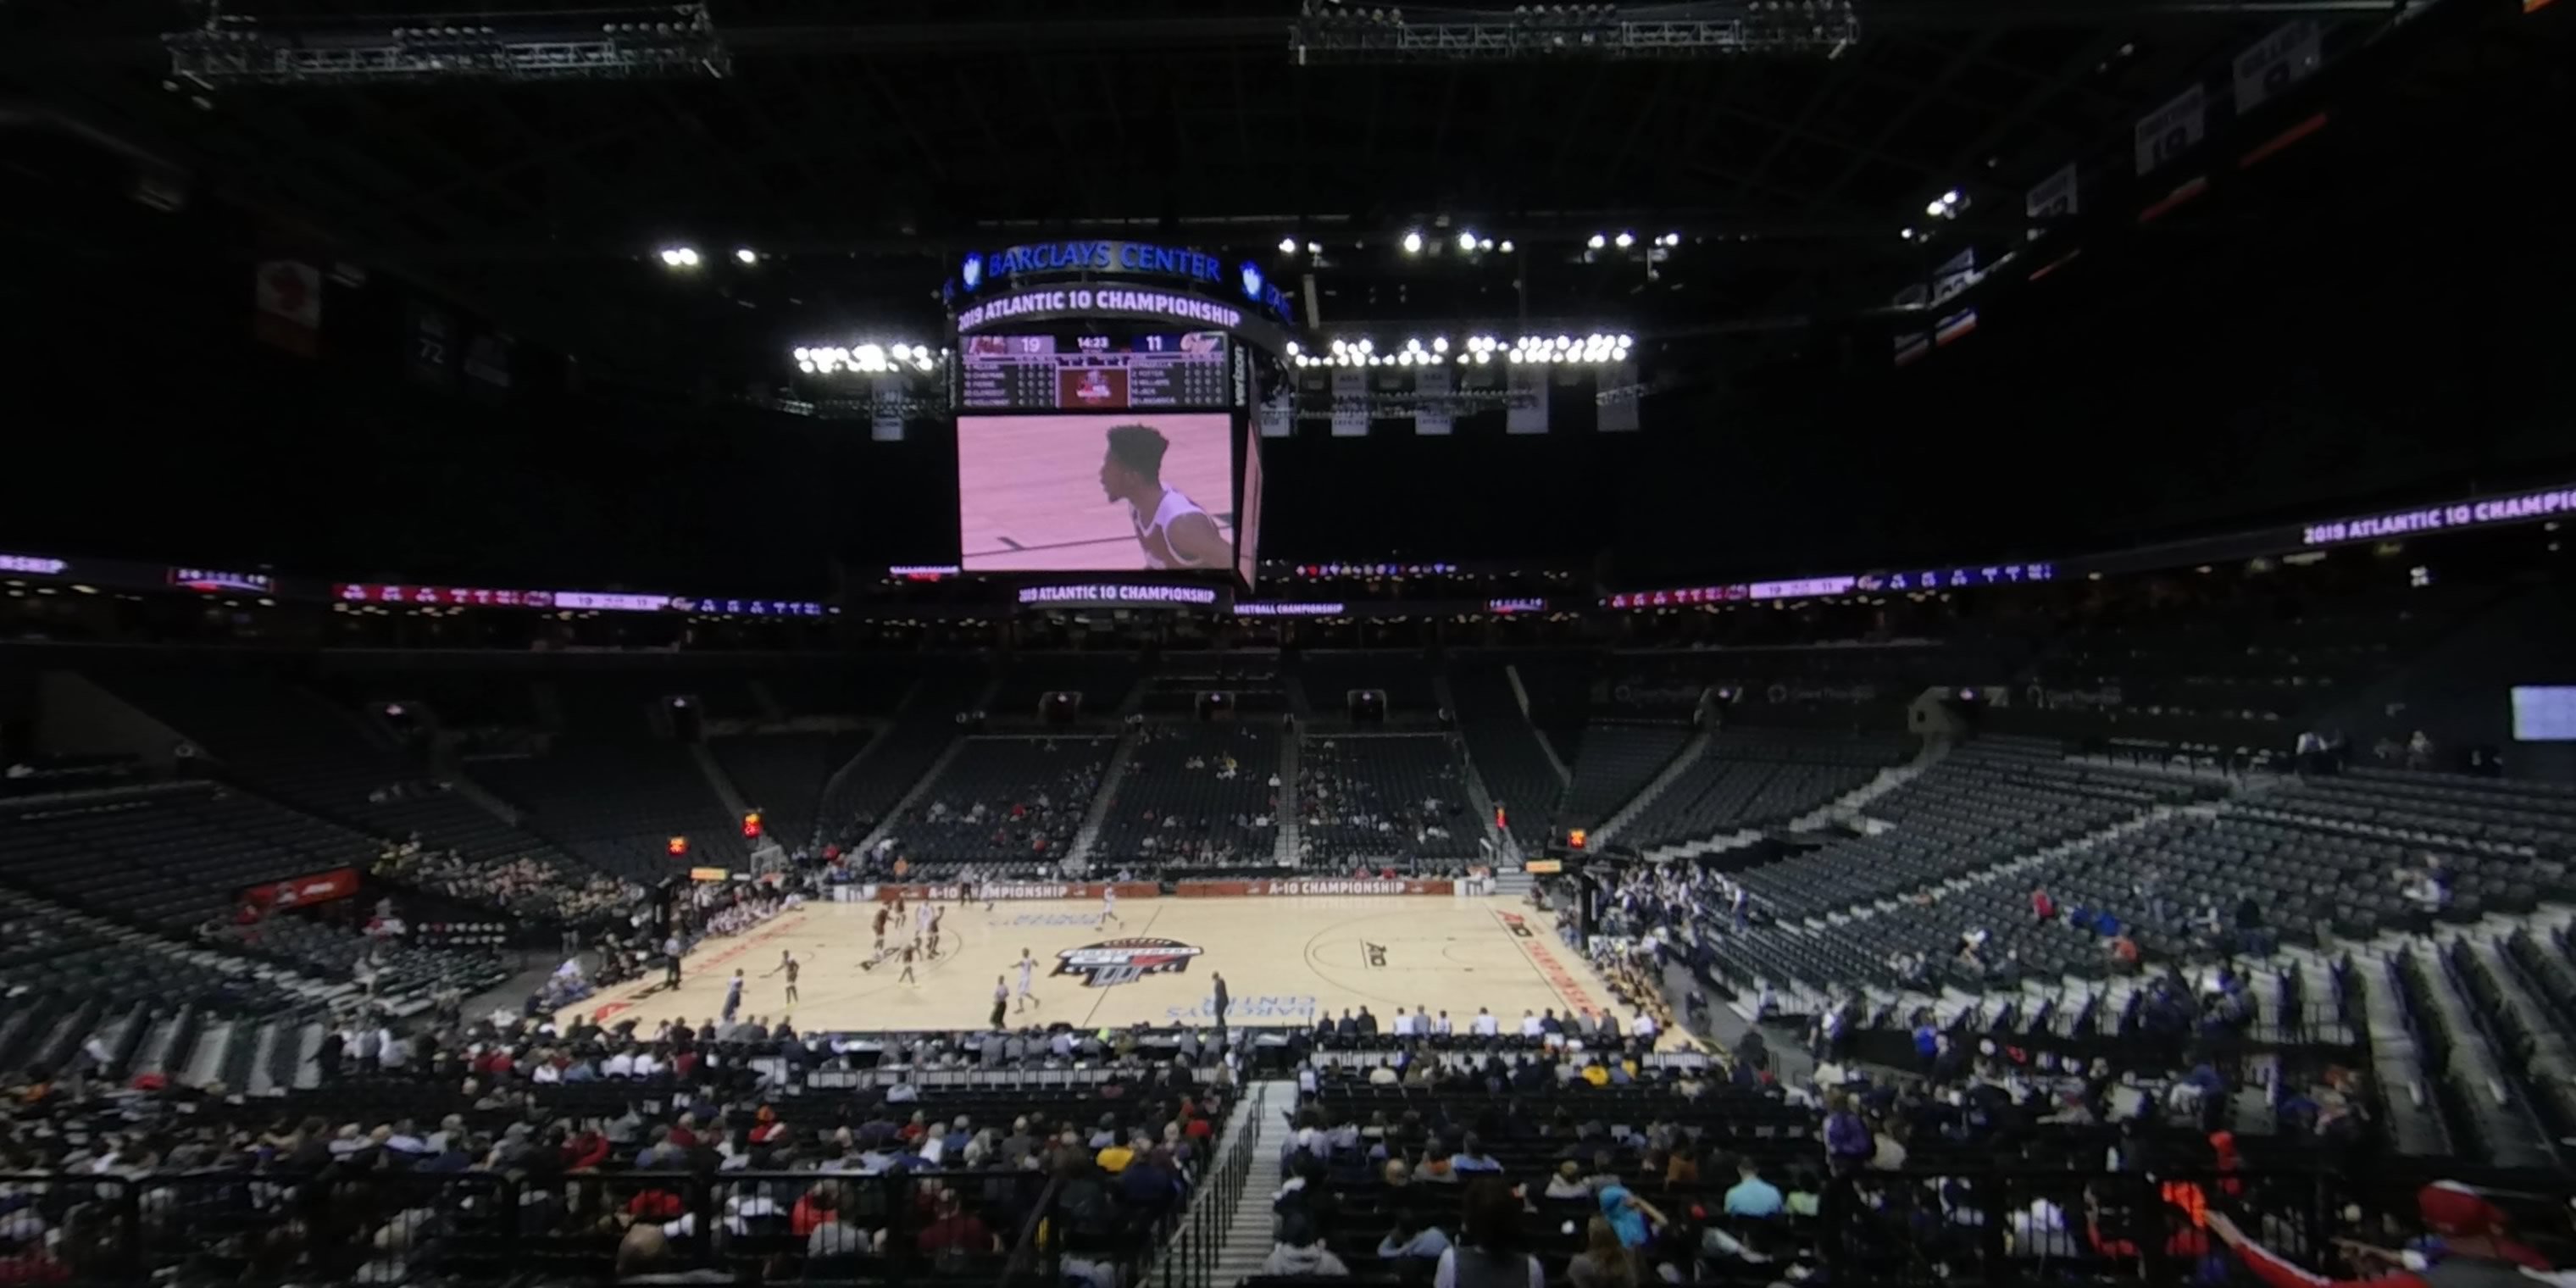 section 107 panoramic seat view  for basketball - barclays center